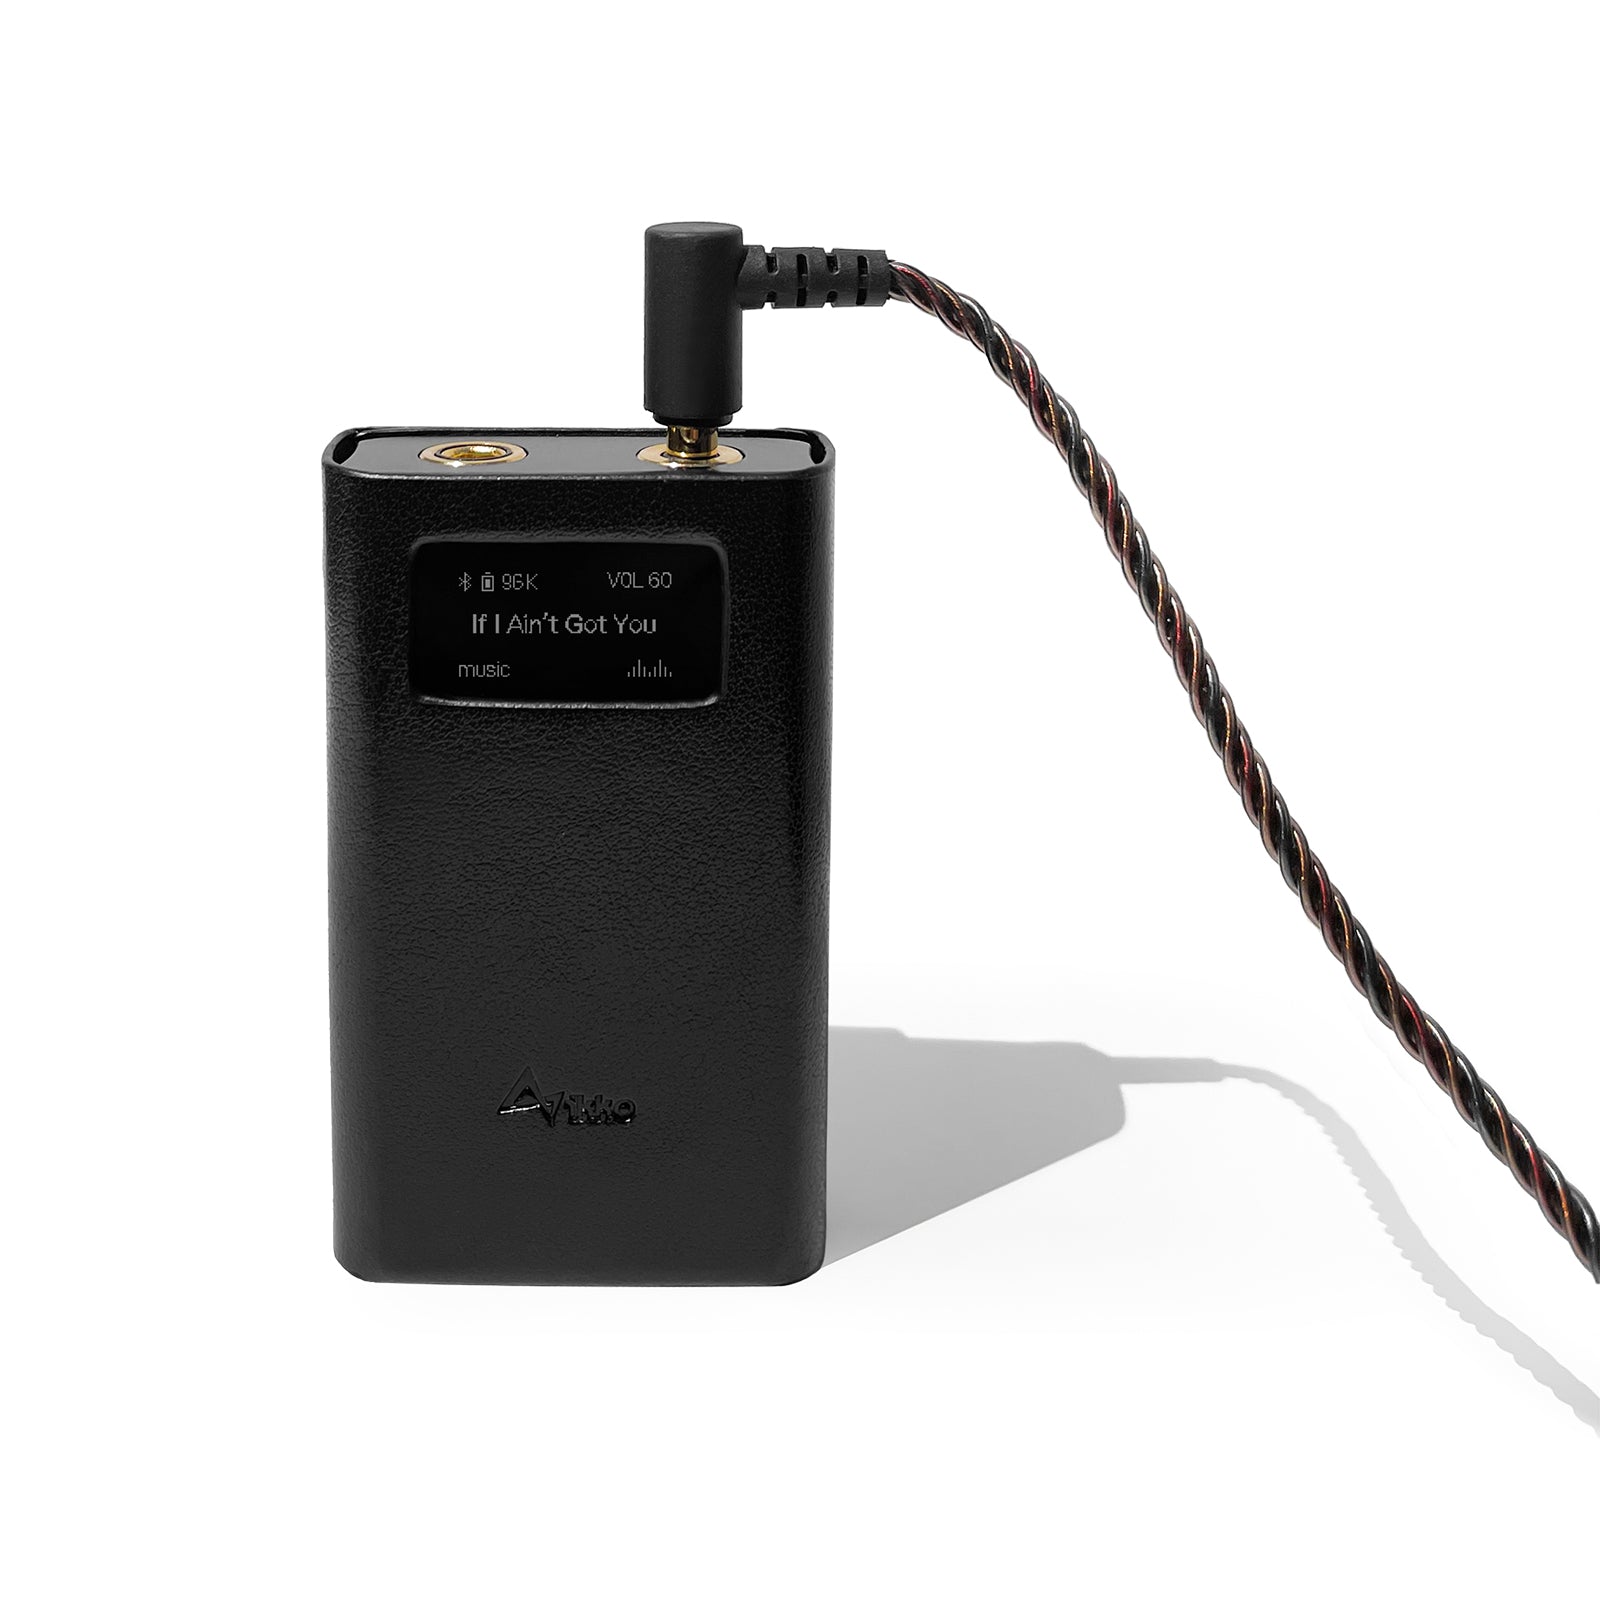 ikko audio Heimdallr ITB03 Sheath-Bluetooth-Headphone-Amplifier-iems-audio-headphones-earbuds-earphone-music-sound-dynamic-hifi-audiophile-review-ear phone-wireless-connections-NFC-cables-3.5mm-4.4mm-Type-C